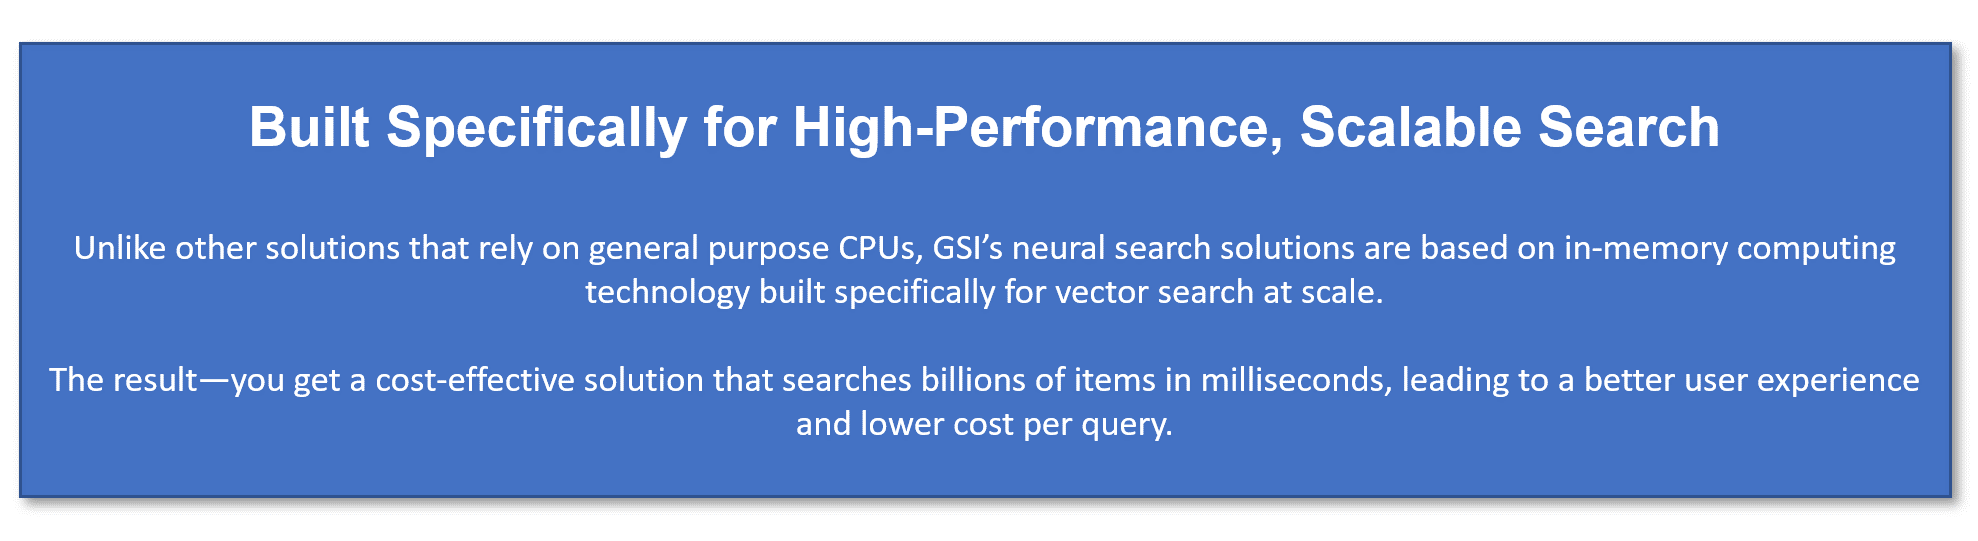 Neural Search Simplified...Built Specifically for High-Performance, Scalable Search